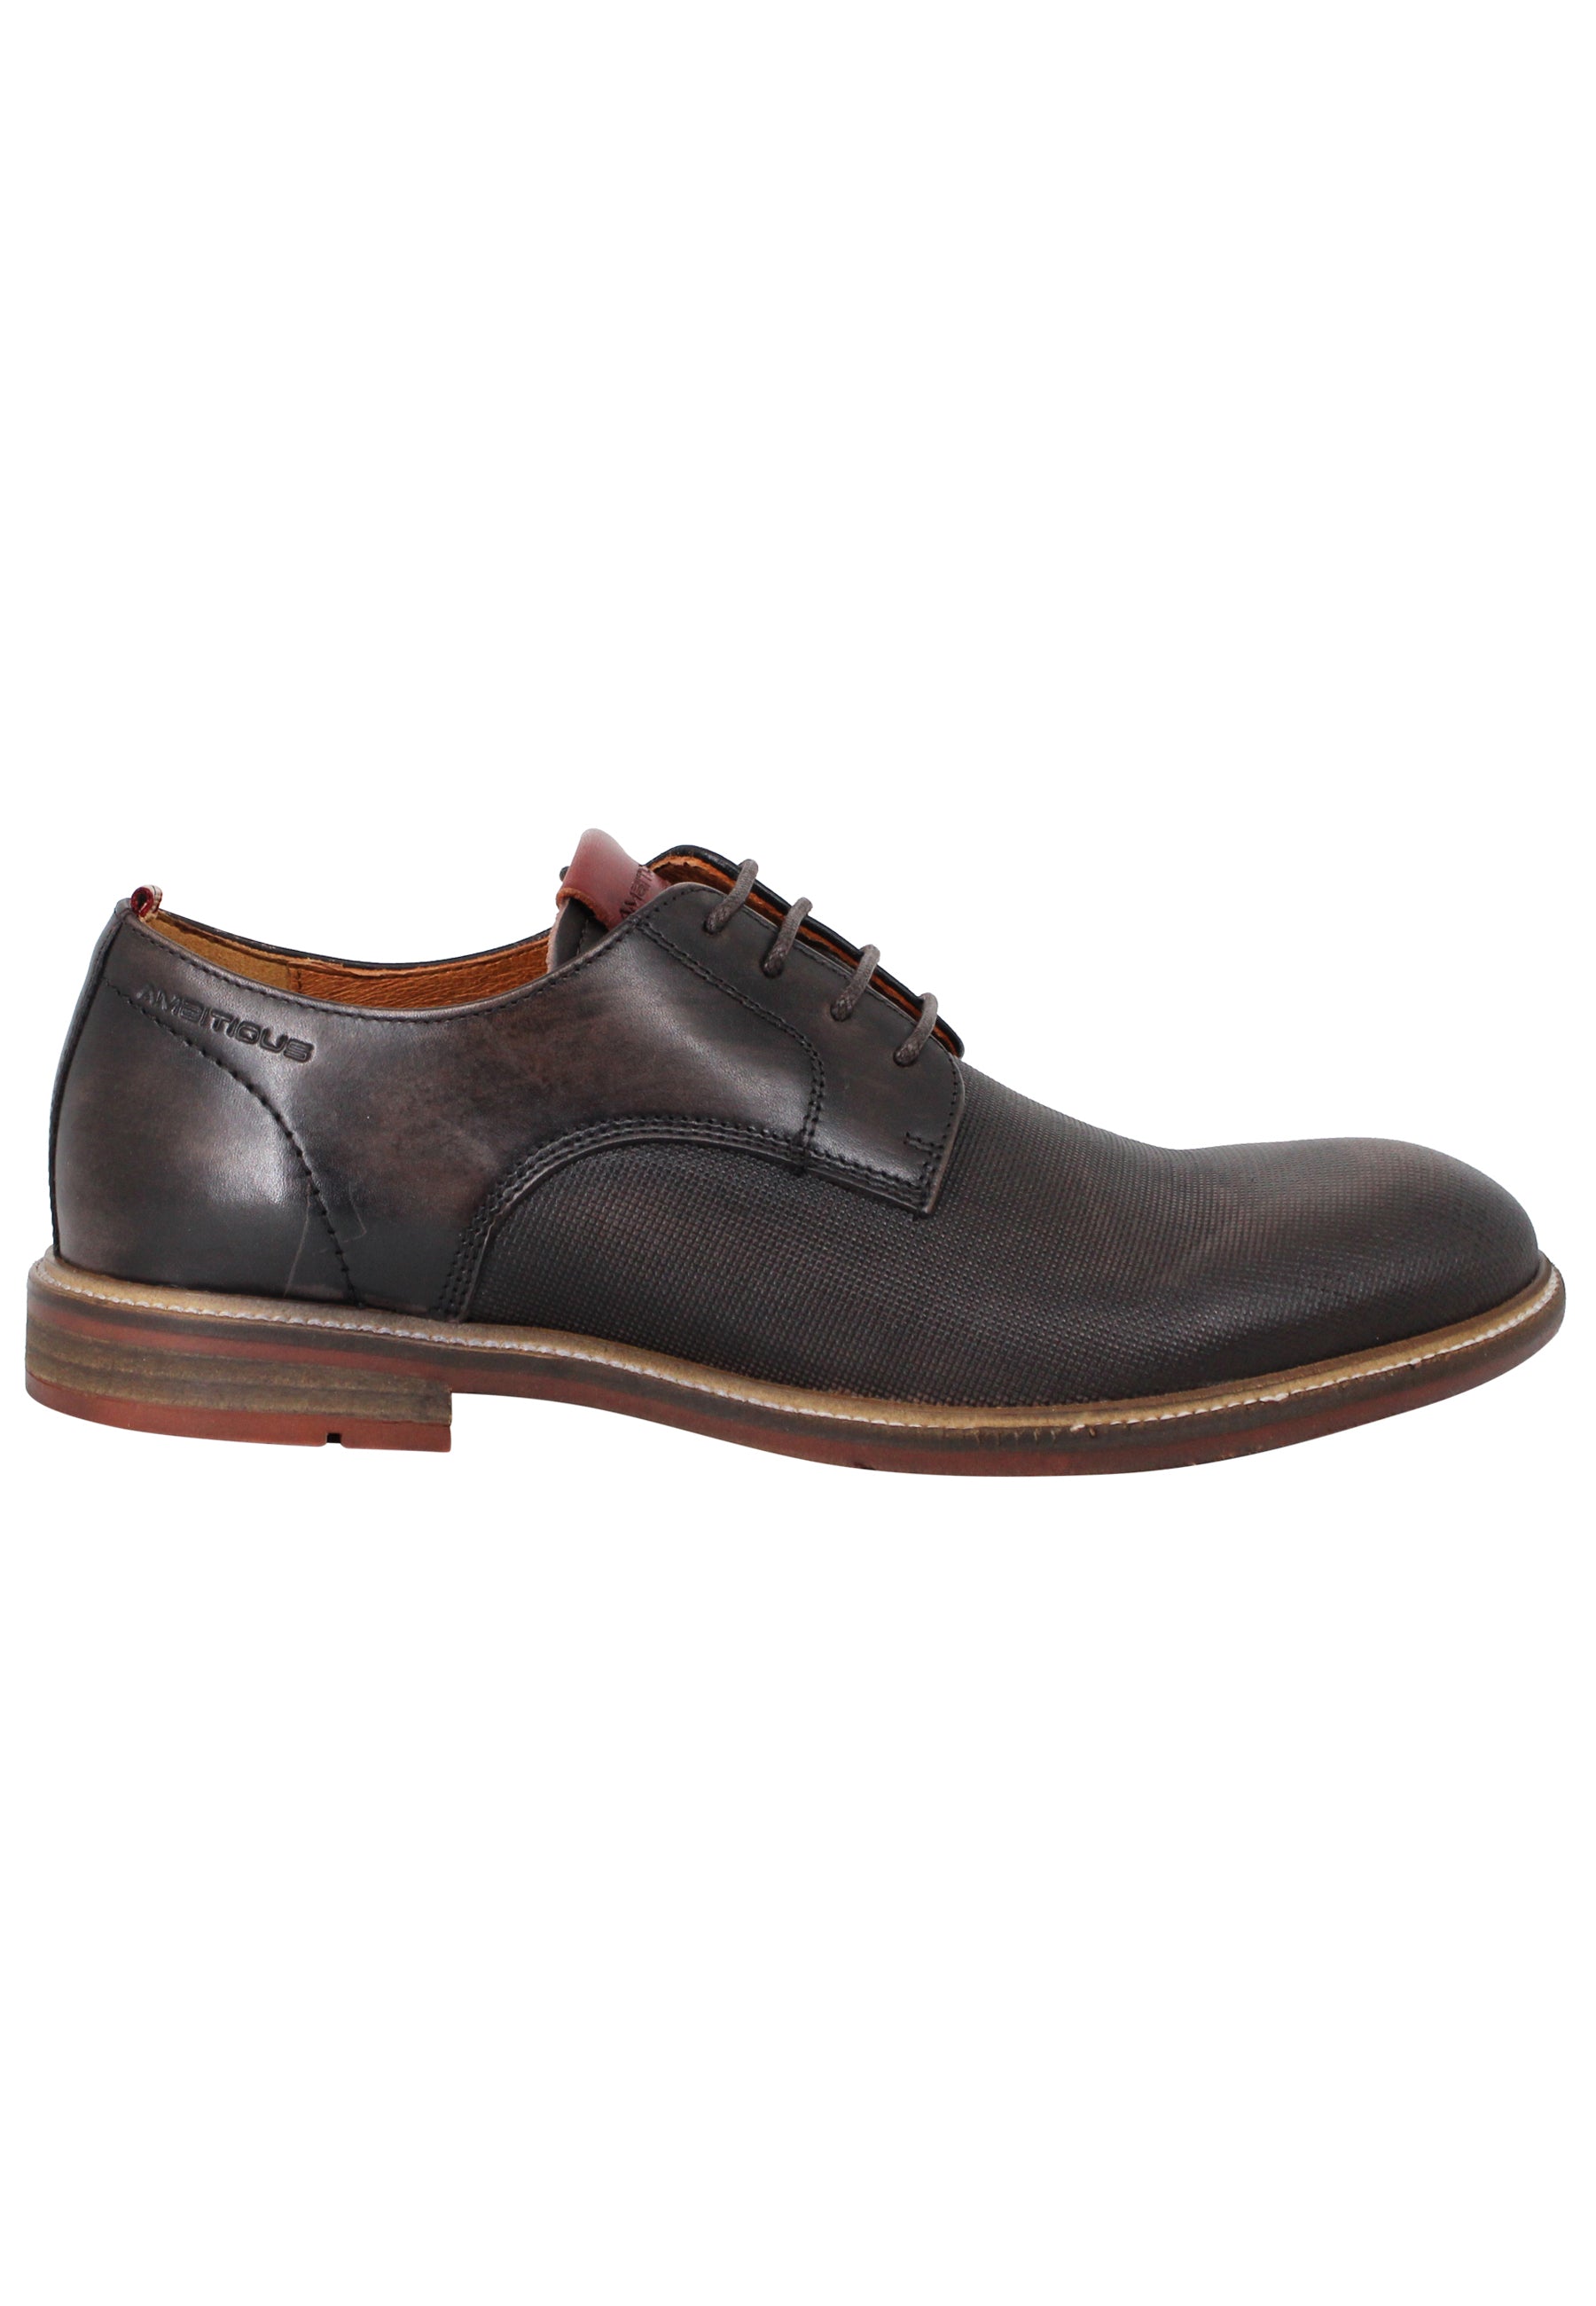 Caye men's lace-ups in dark brown leather with leather and rubber sole